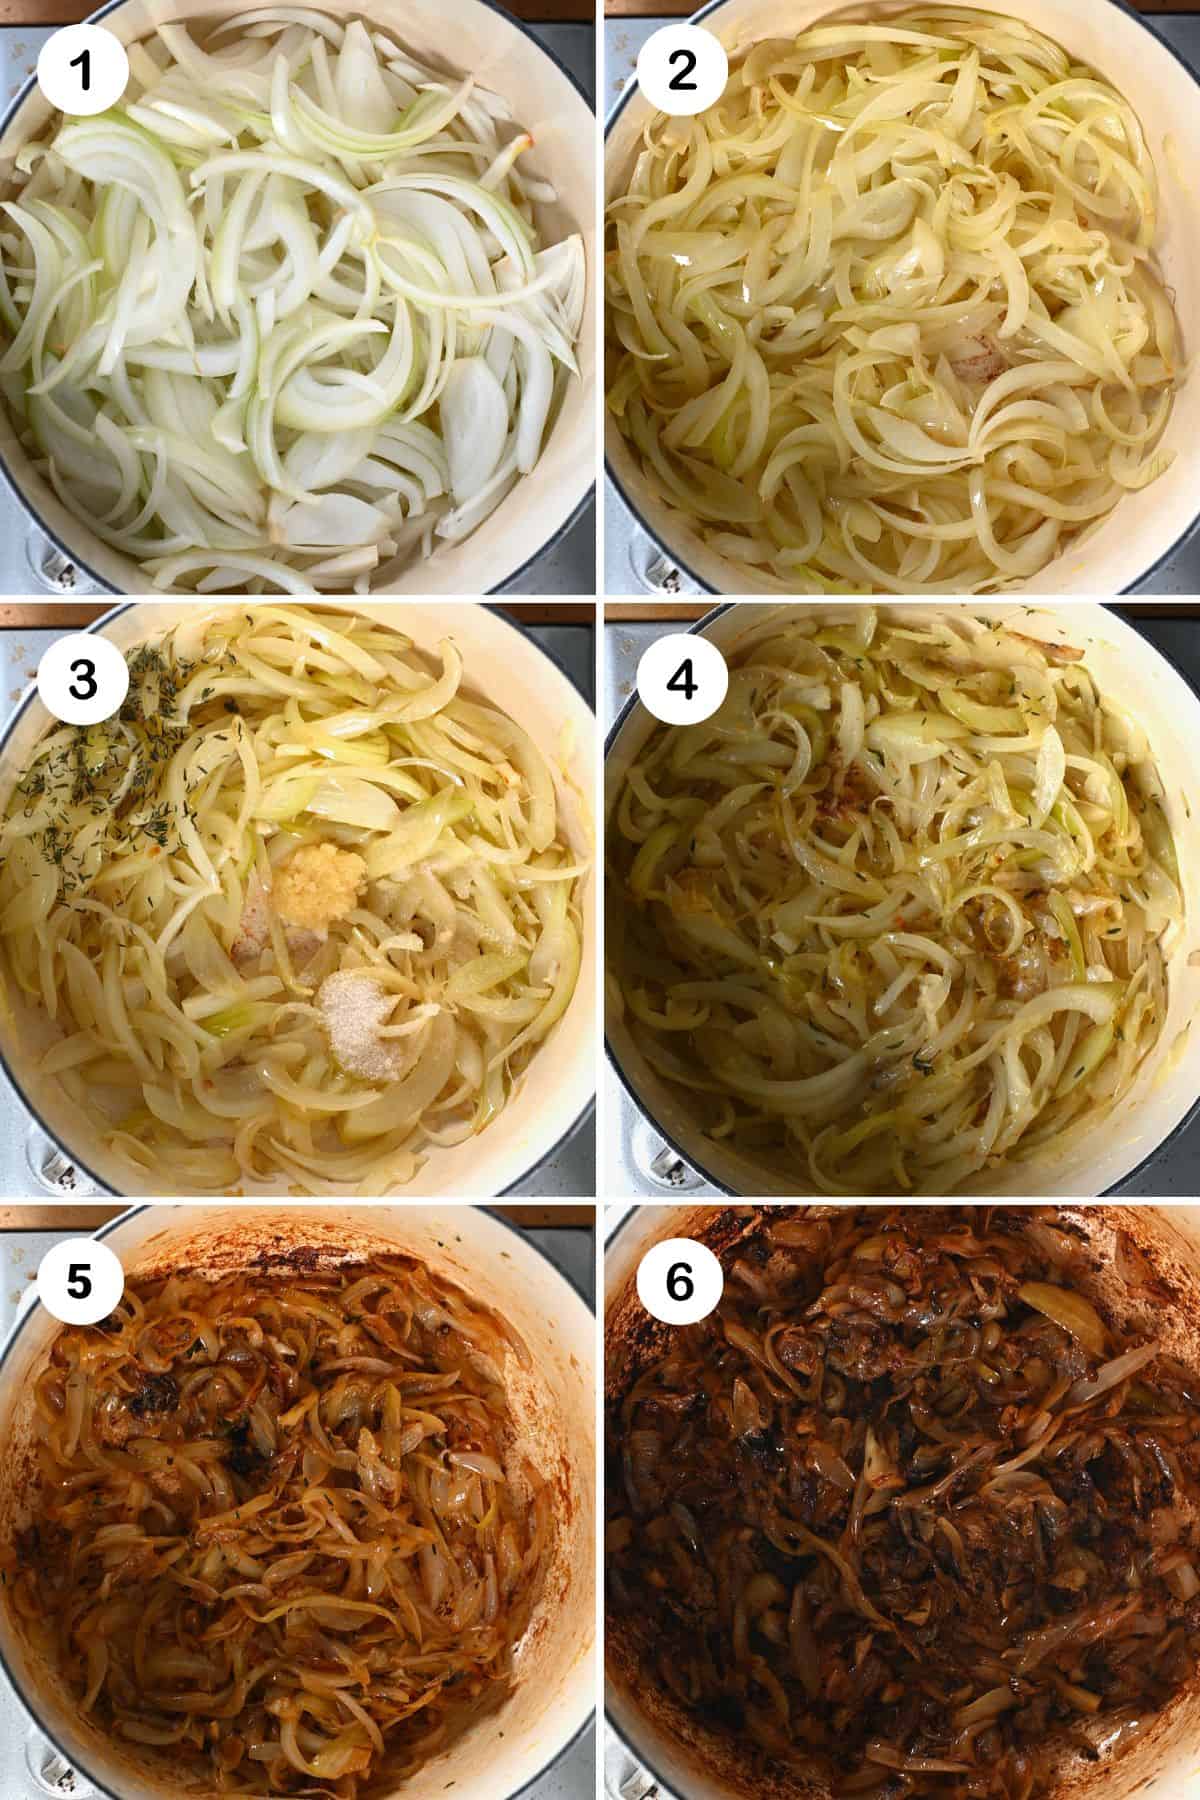 Steps for cooking onions